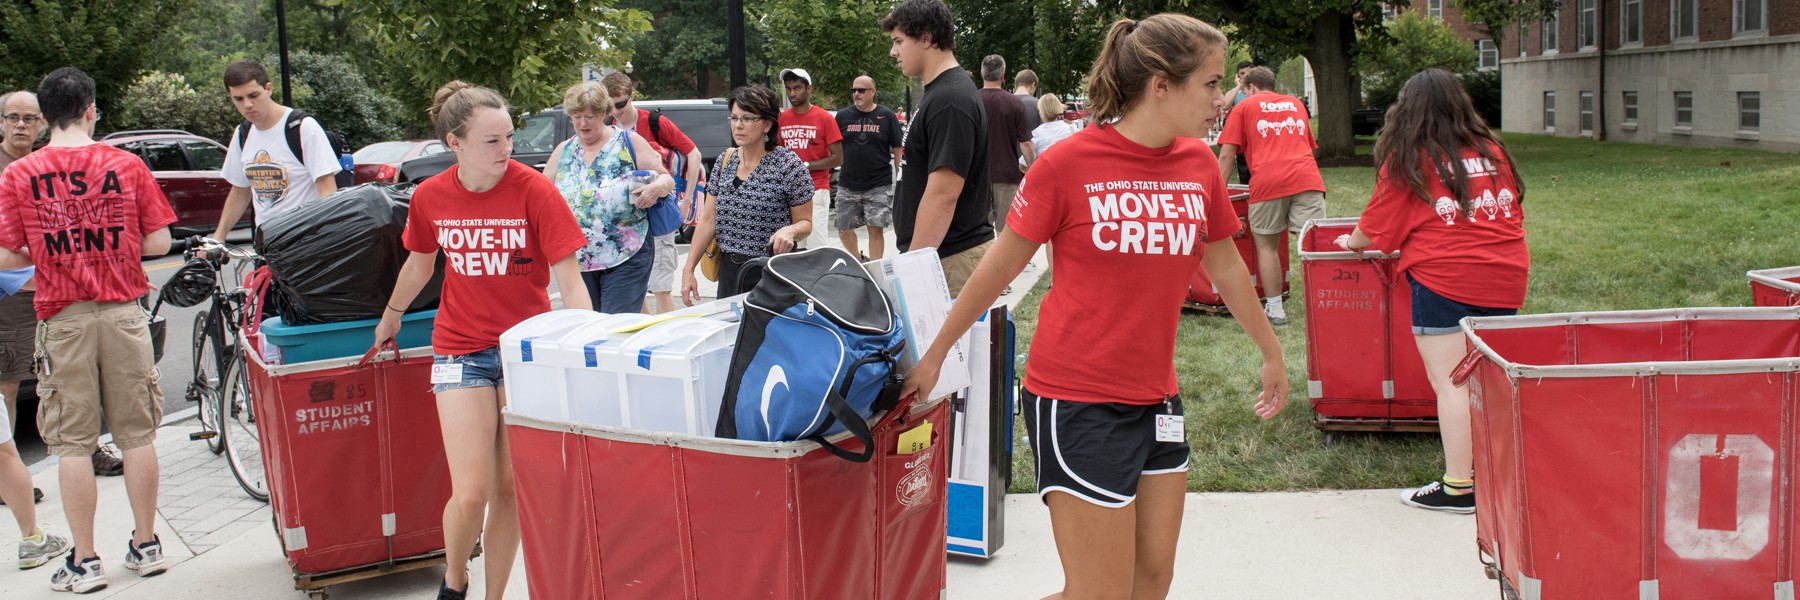 Move-in day for fall 2017 at Ohio State University